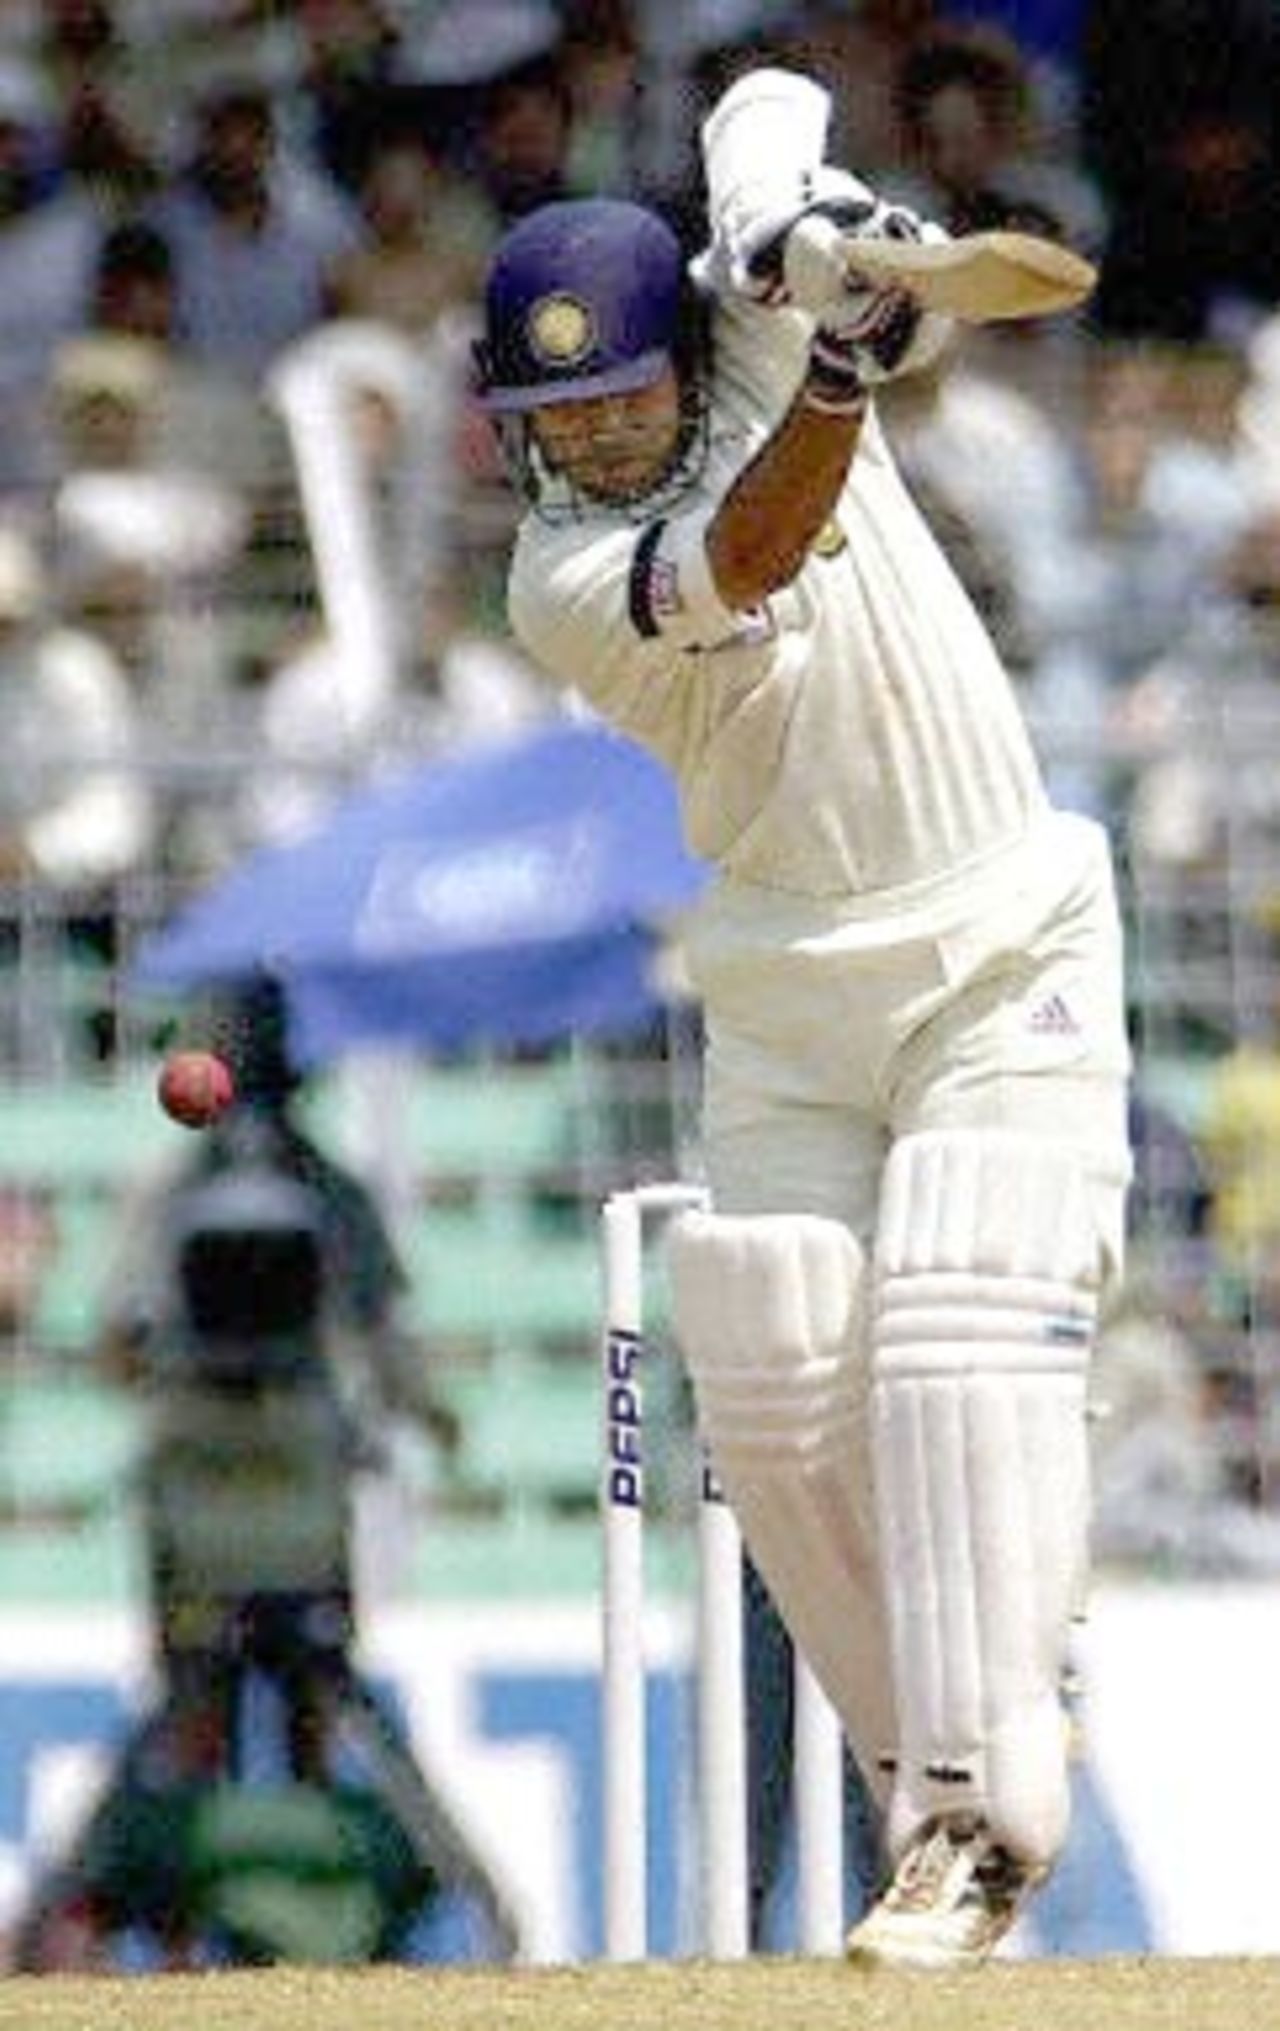 Indian batsman Sachin Tendulkar drives a delivery from Australian bowler Jason Gillespie to the fence on the third day of the first test match between India and Australia at the Wankhade stadium in Mumbai 01 March 2001. Tendulkar was playing at 61 runs to place India at a more comfortable 150 for 2 after conceding a 173 runs lead to Australia in the first innings.